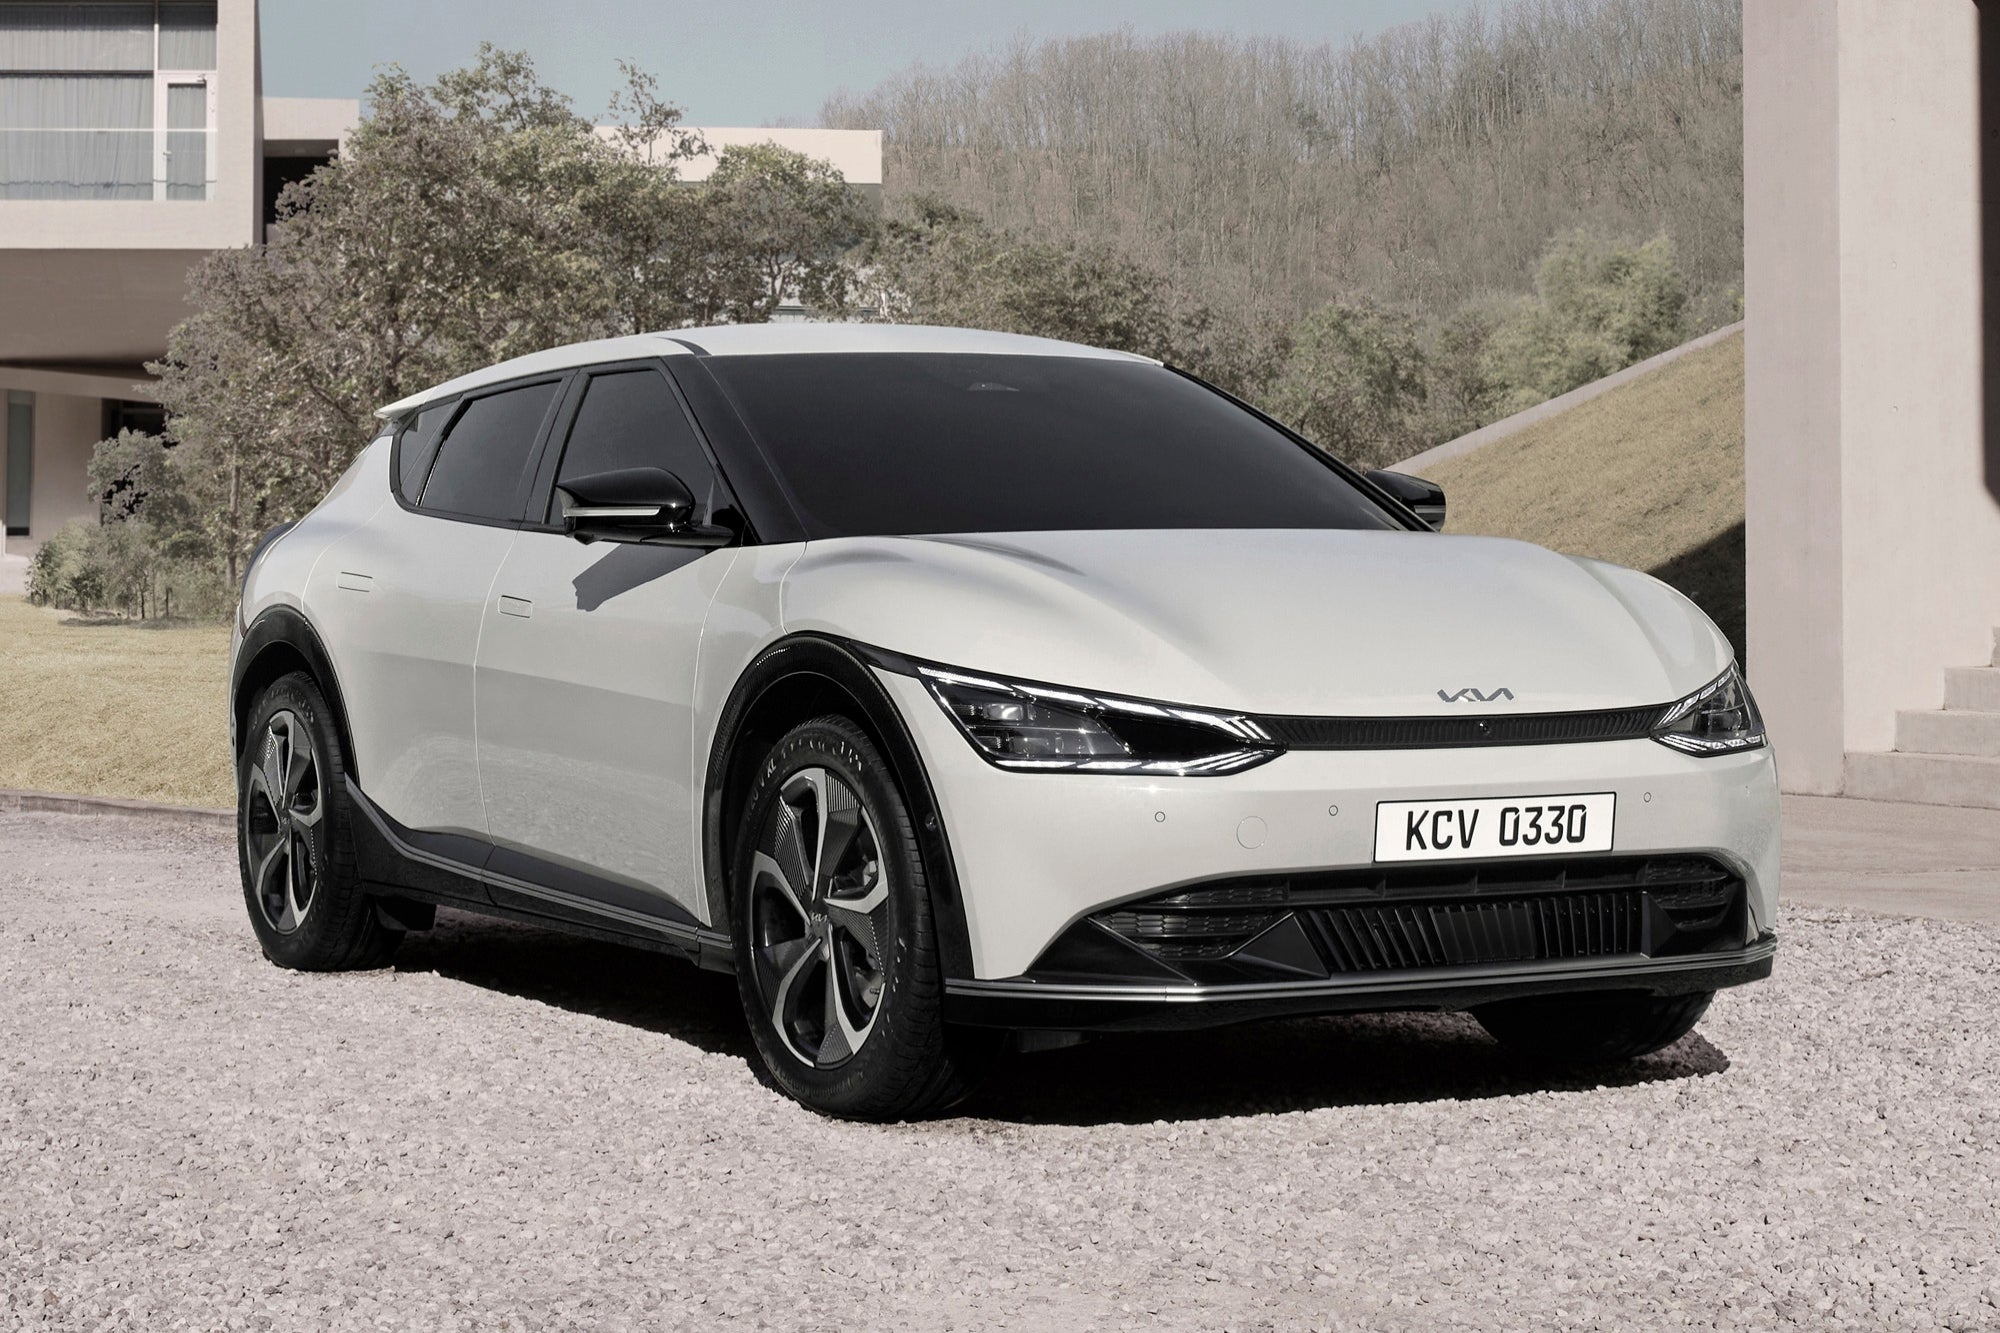 Kia Just Released Photos of Its First Electric Car - And They're Incredible